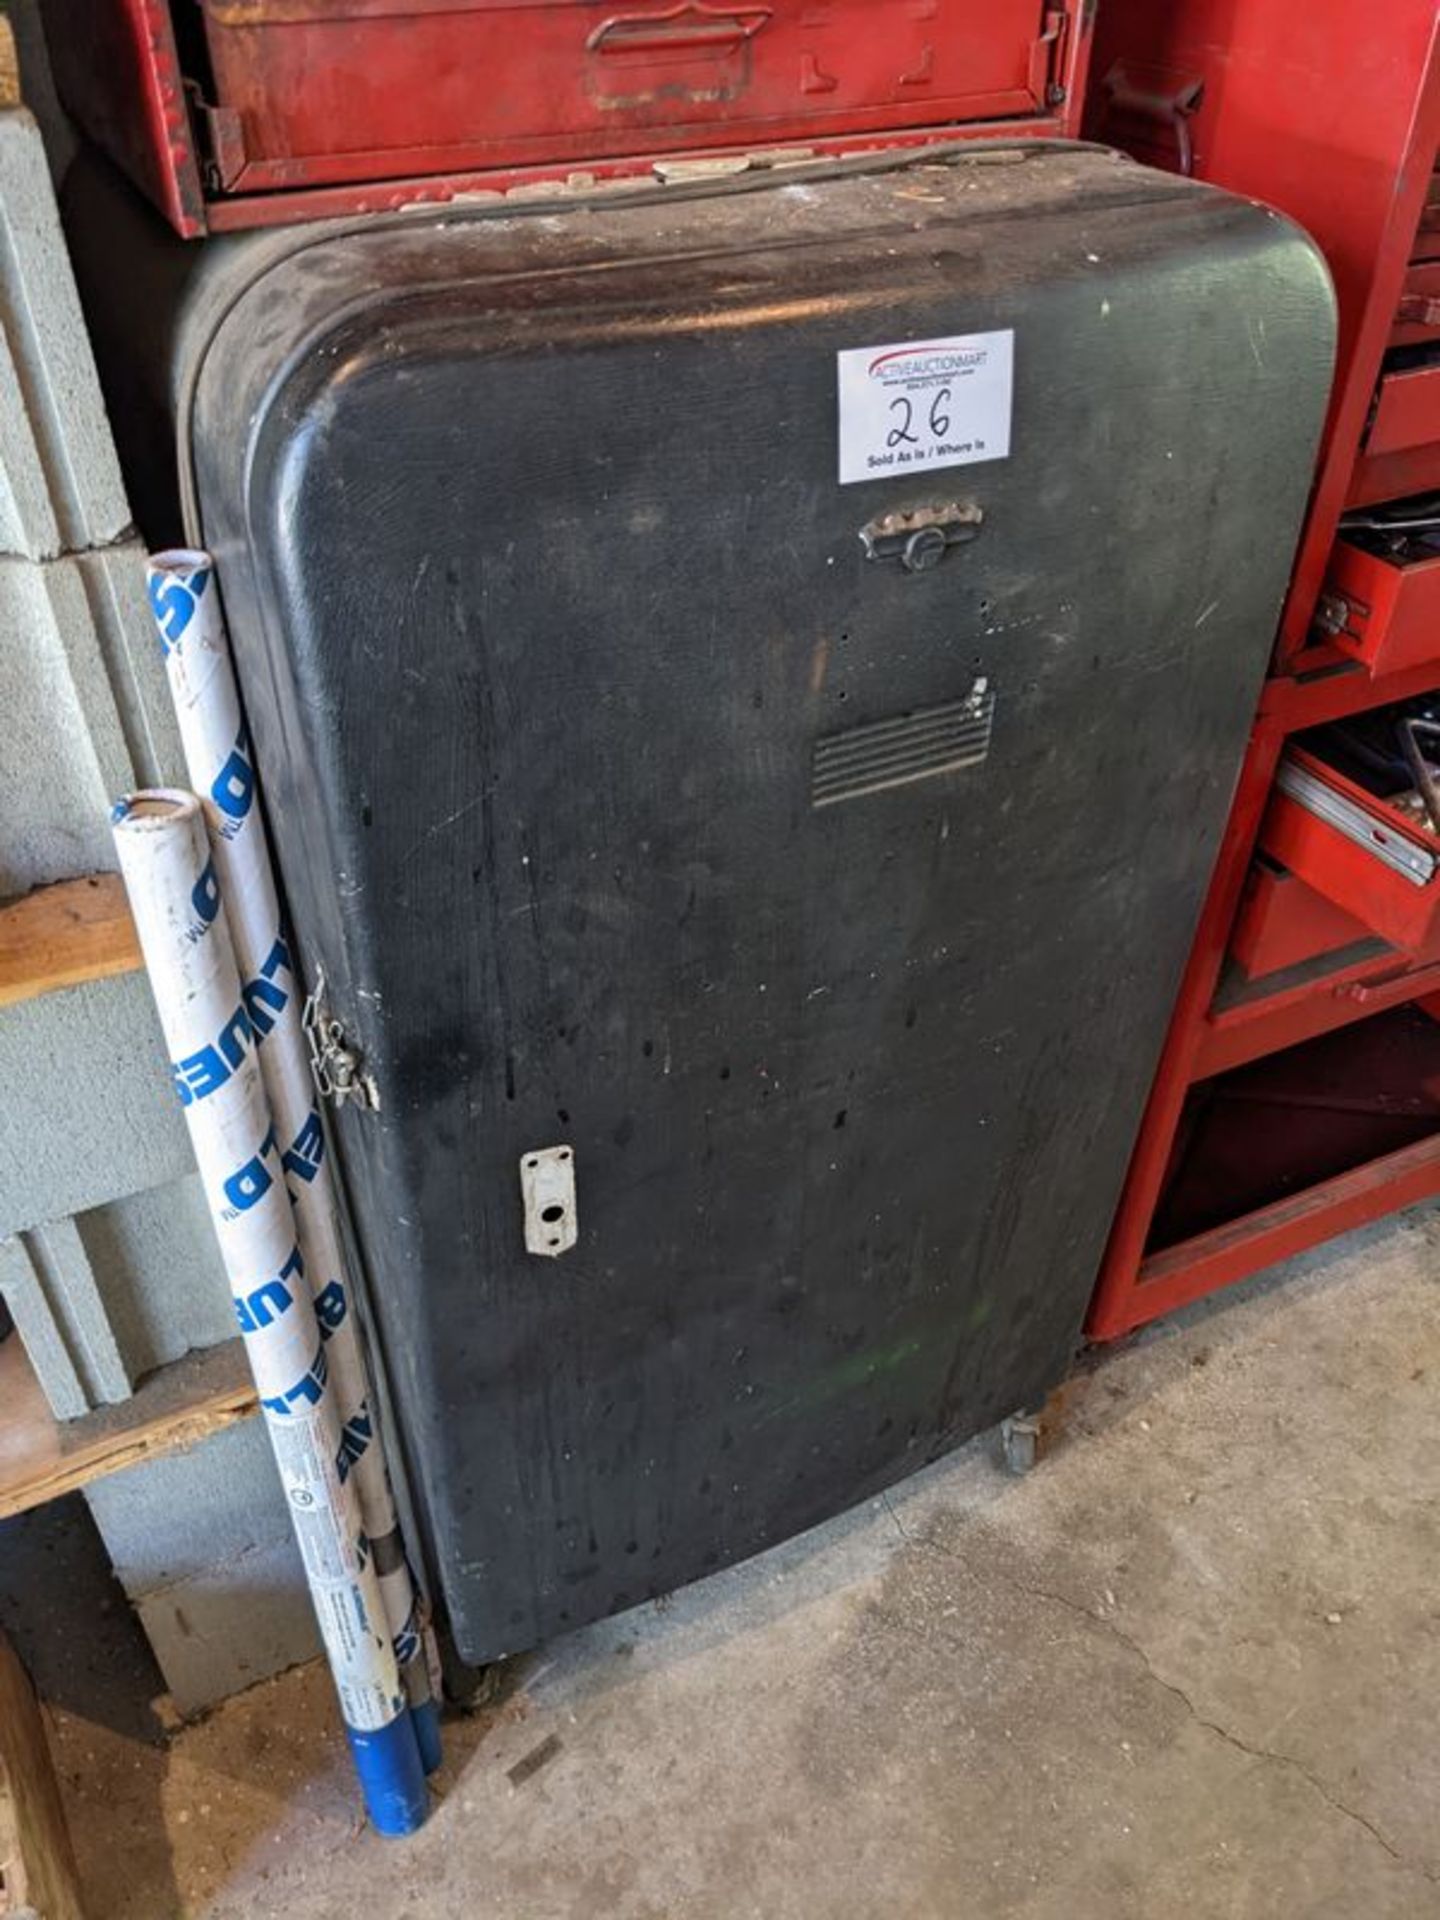 Antique Fridge with Large Amount of Welding Supplies